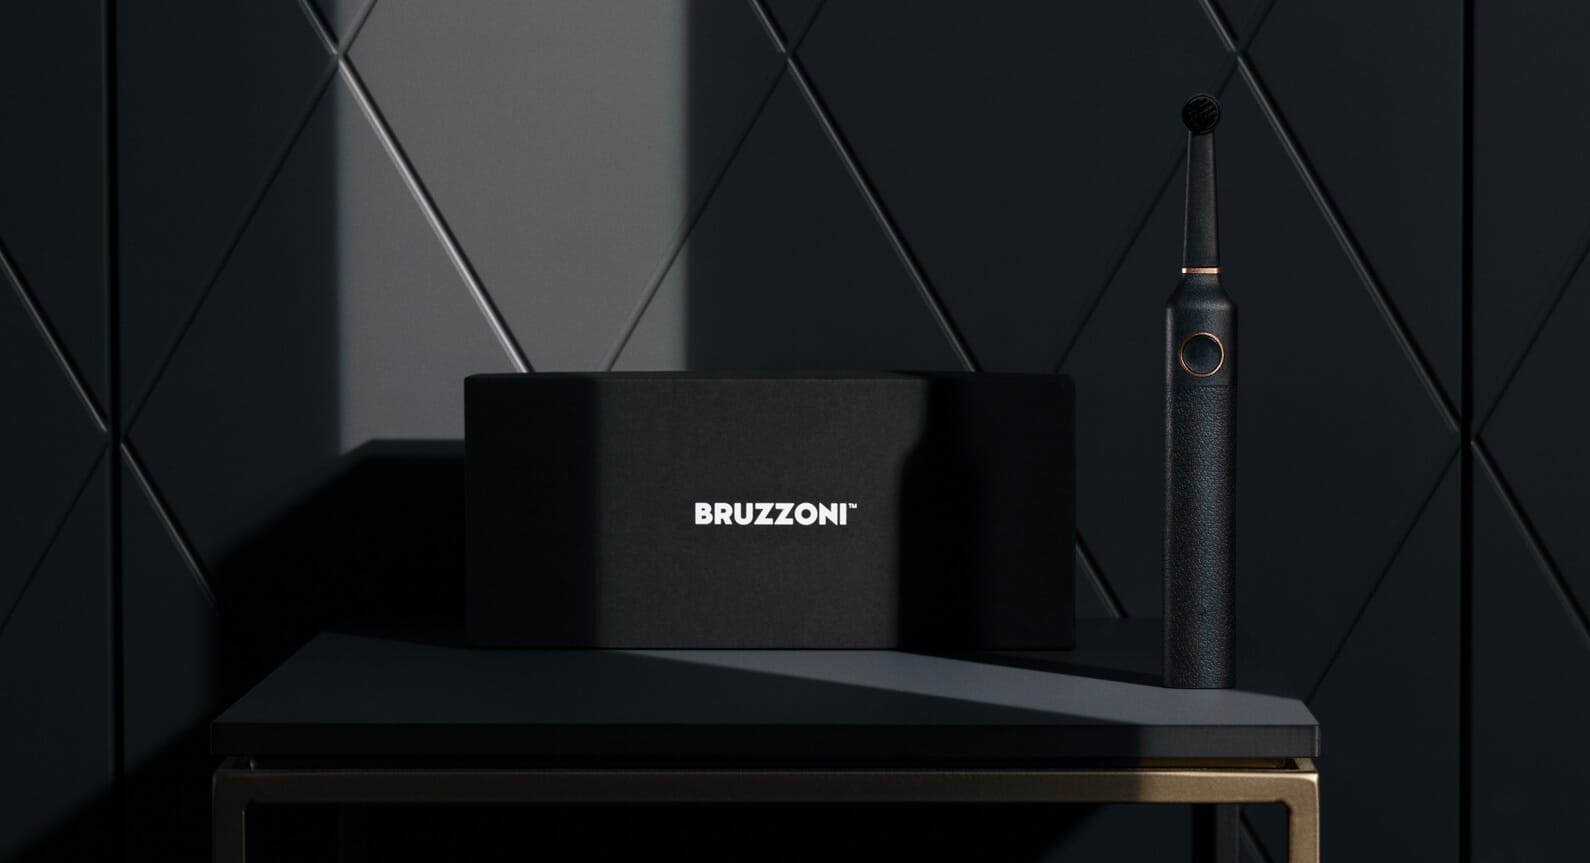 The Bruzzoni Electric Toothbrush Review